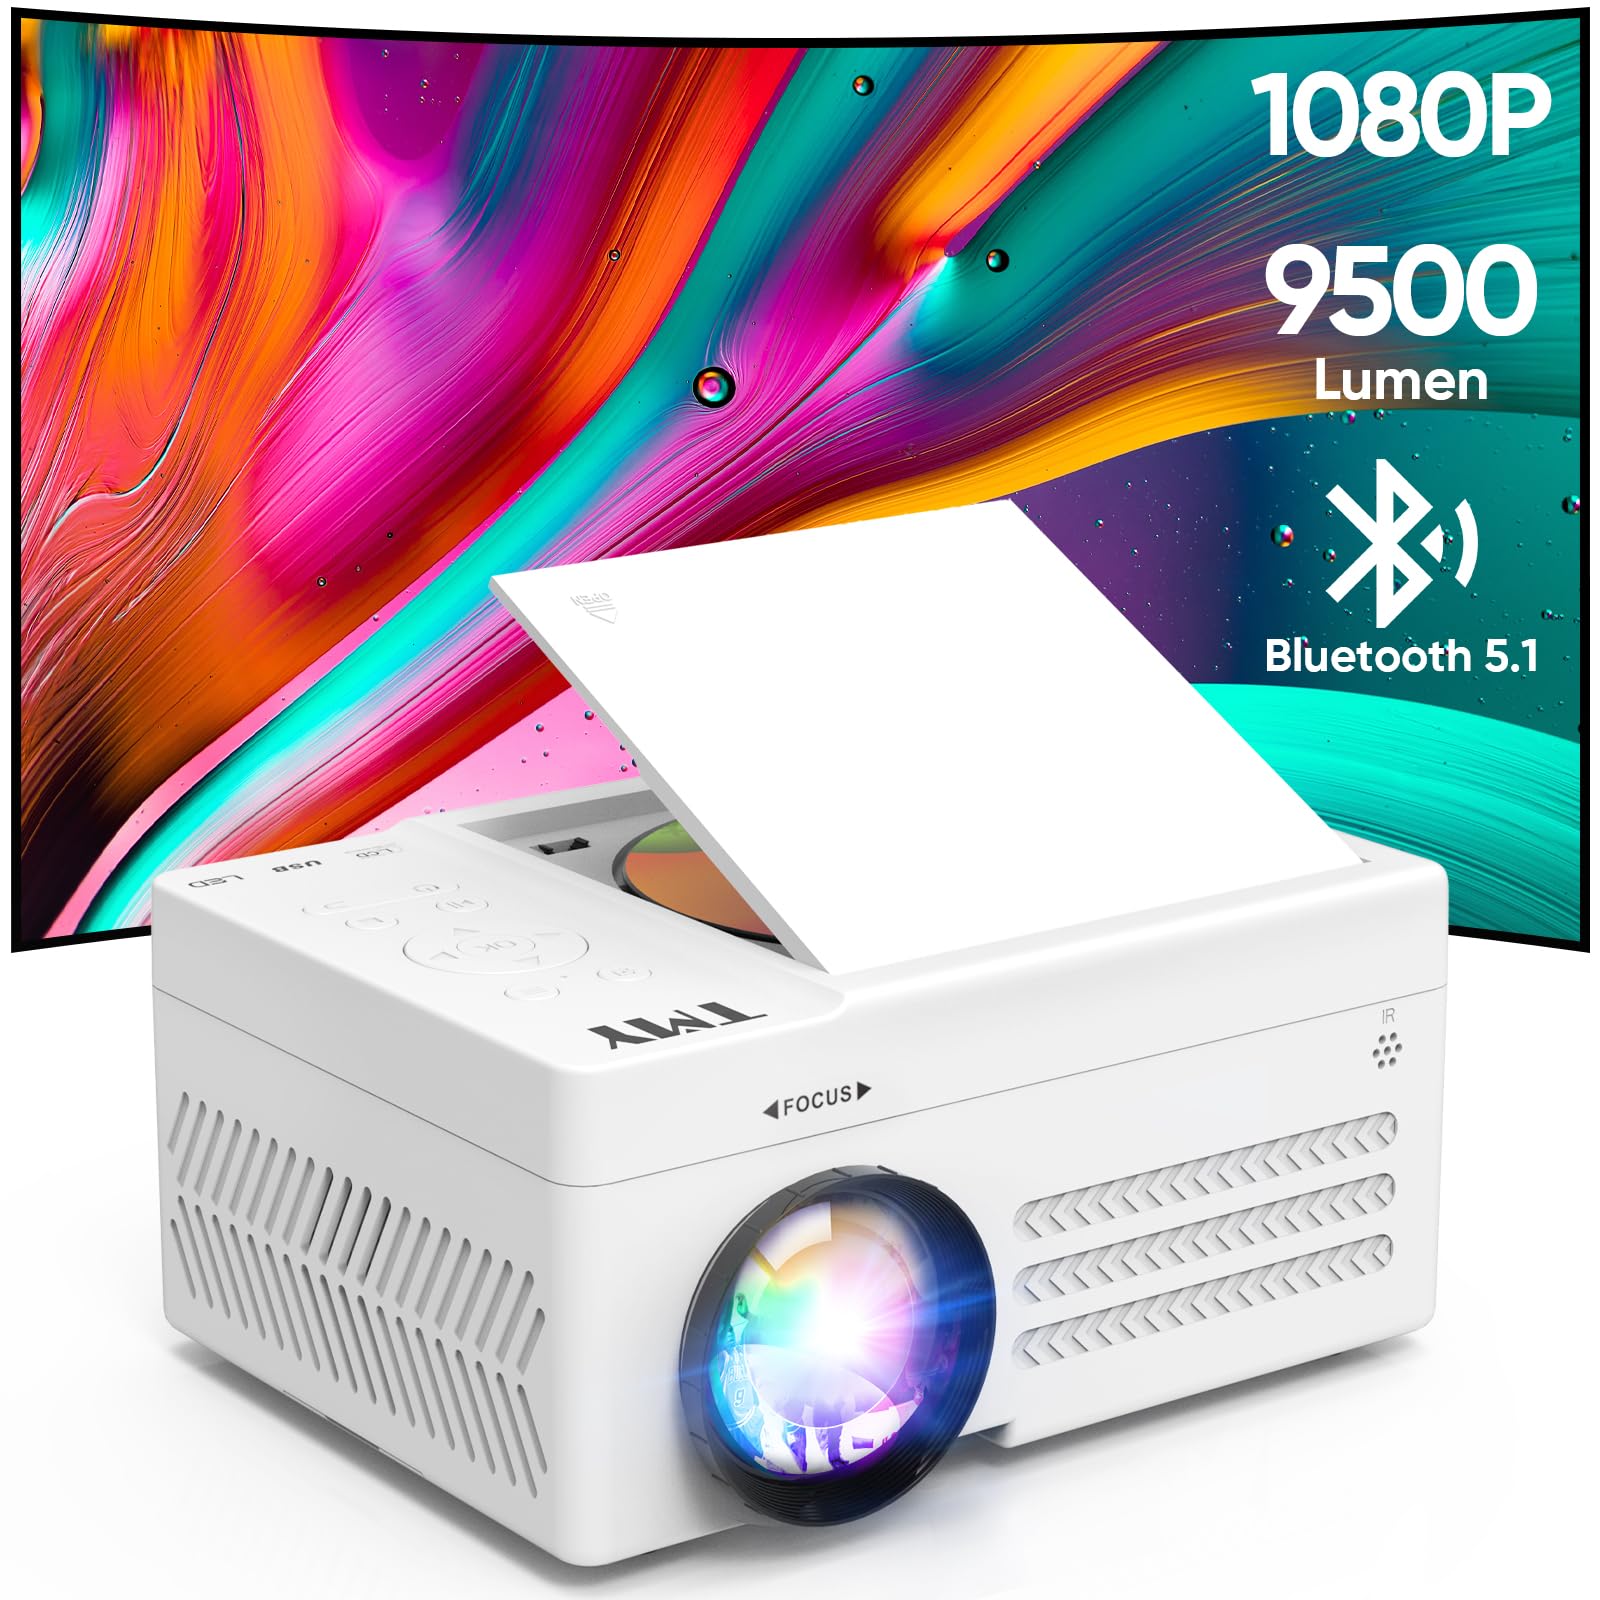 TMY Bluetooth Projector with DVD Player Built in, 1080P Outdoor Projector with 9500 Lumen, Mini Portable DVD Projector Compatible with Smartphone/PC/TV Stick/HDMI/AV/USB/TF, indoor & outdoor use